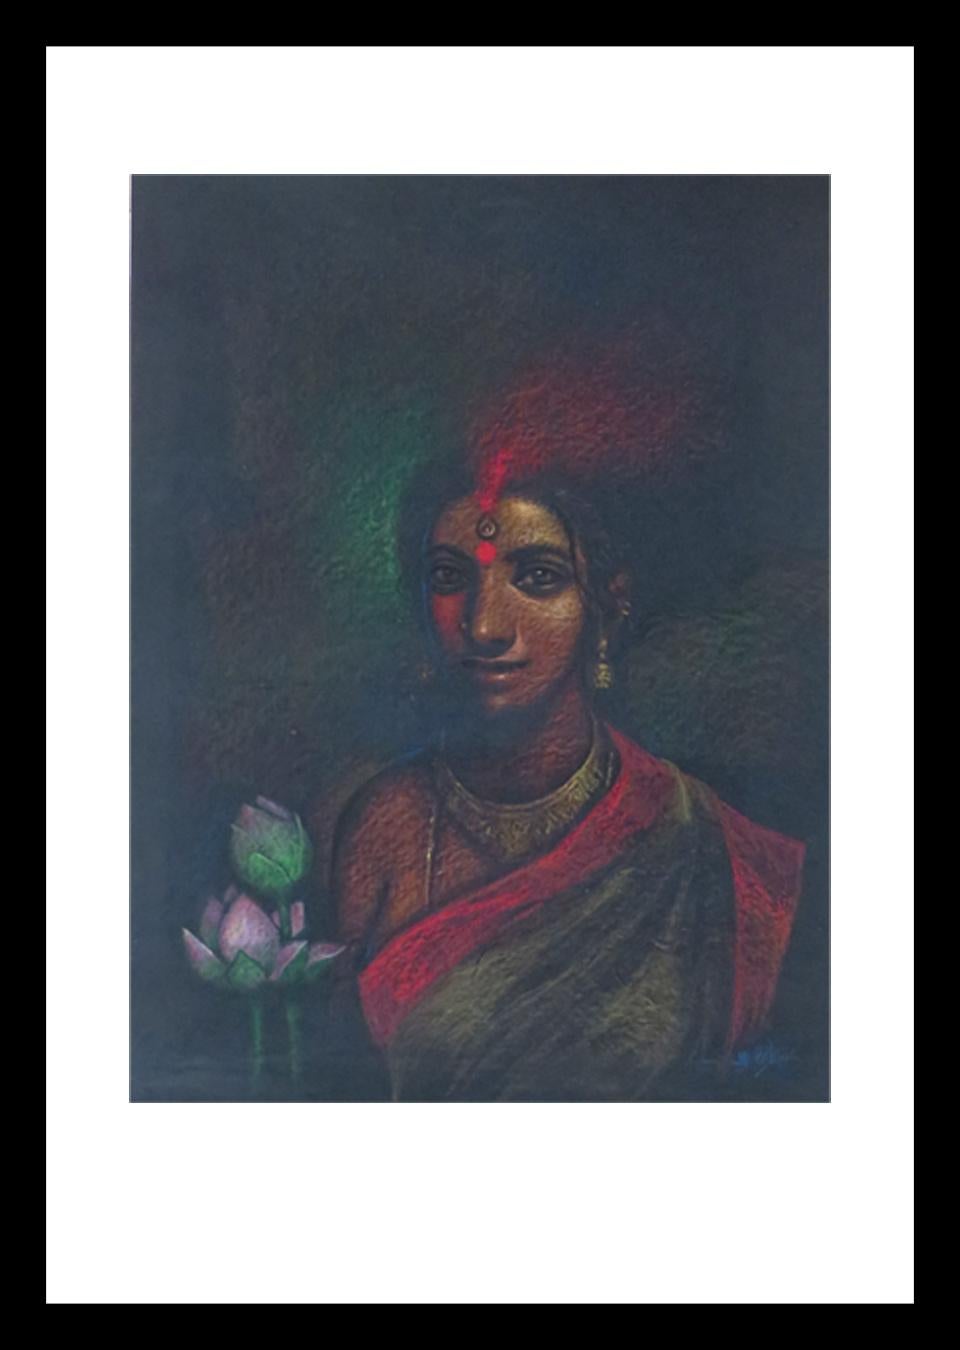 Subrata Das Figurative Painting - She-I, Bath, Pastel on paper, Red, Pink, Green by Indian Artist "In Stock"